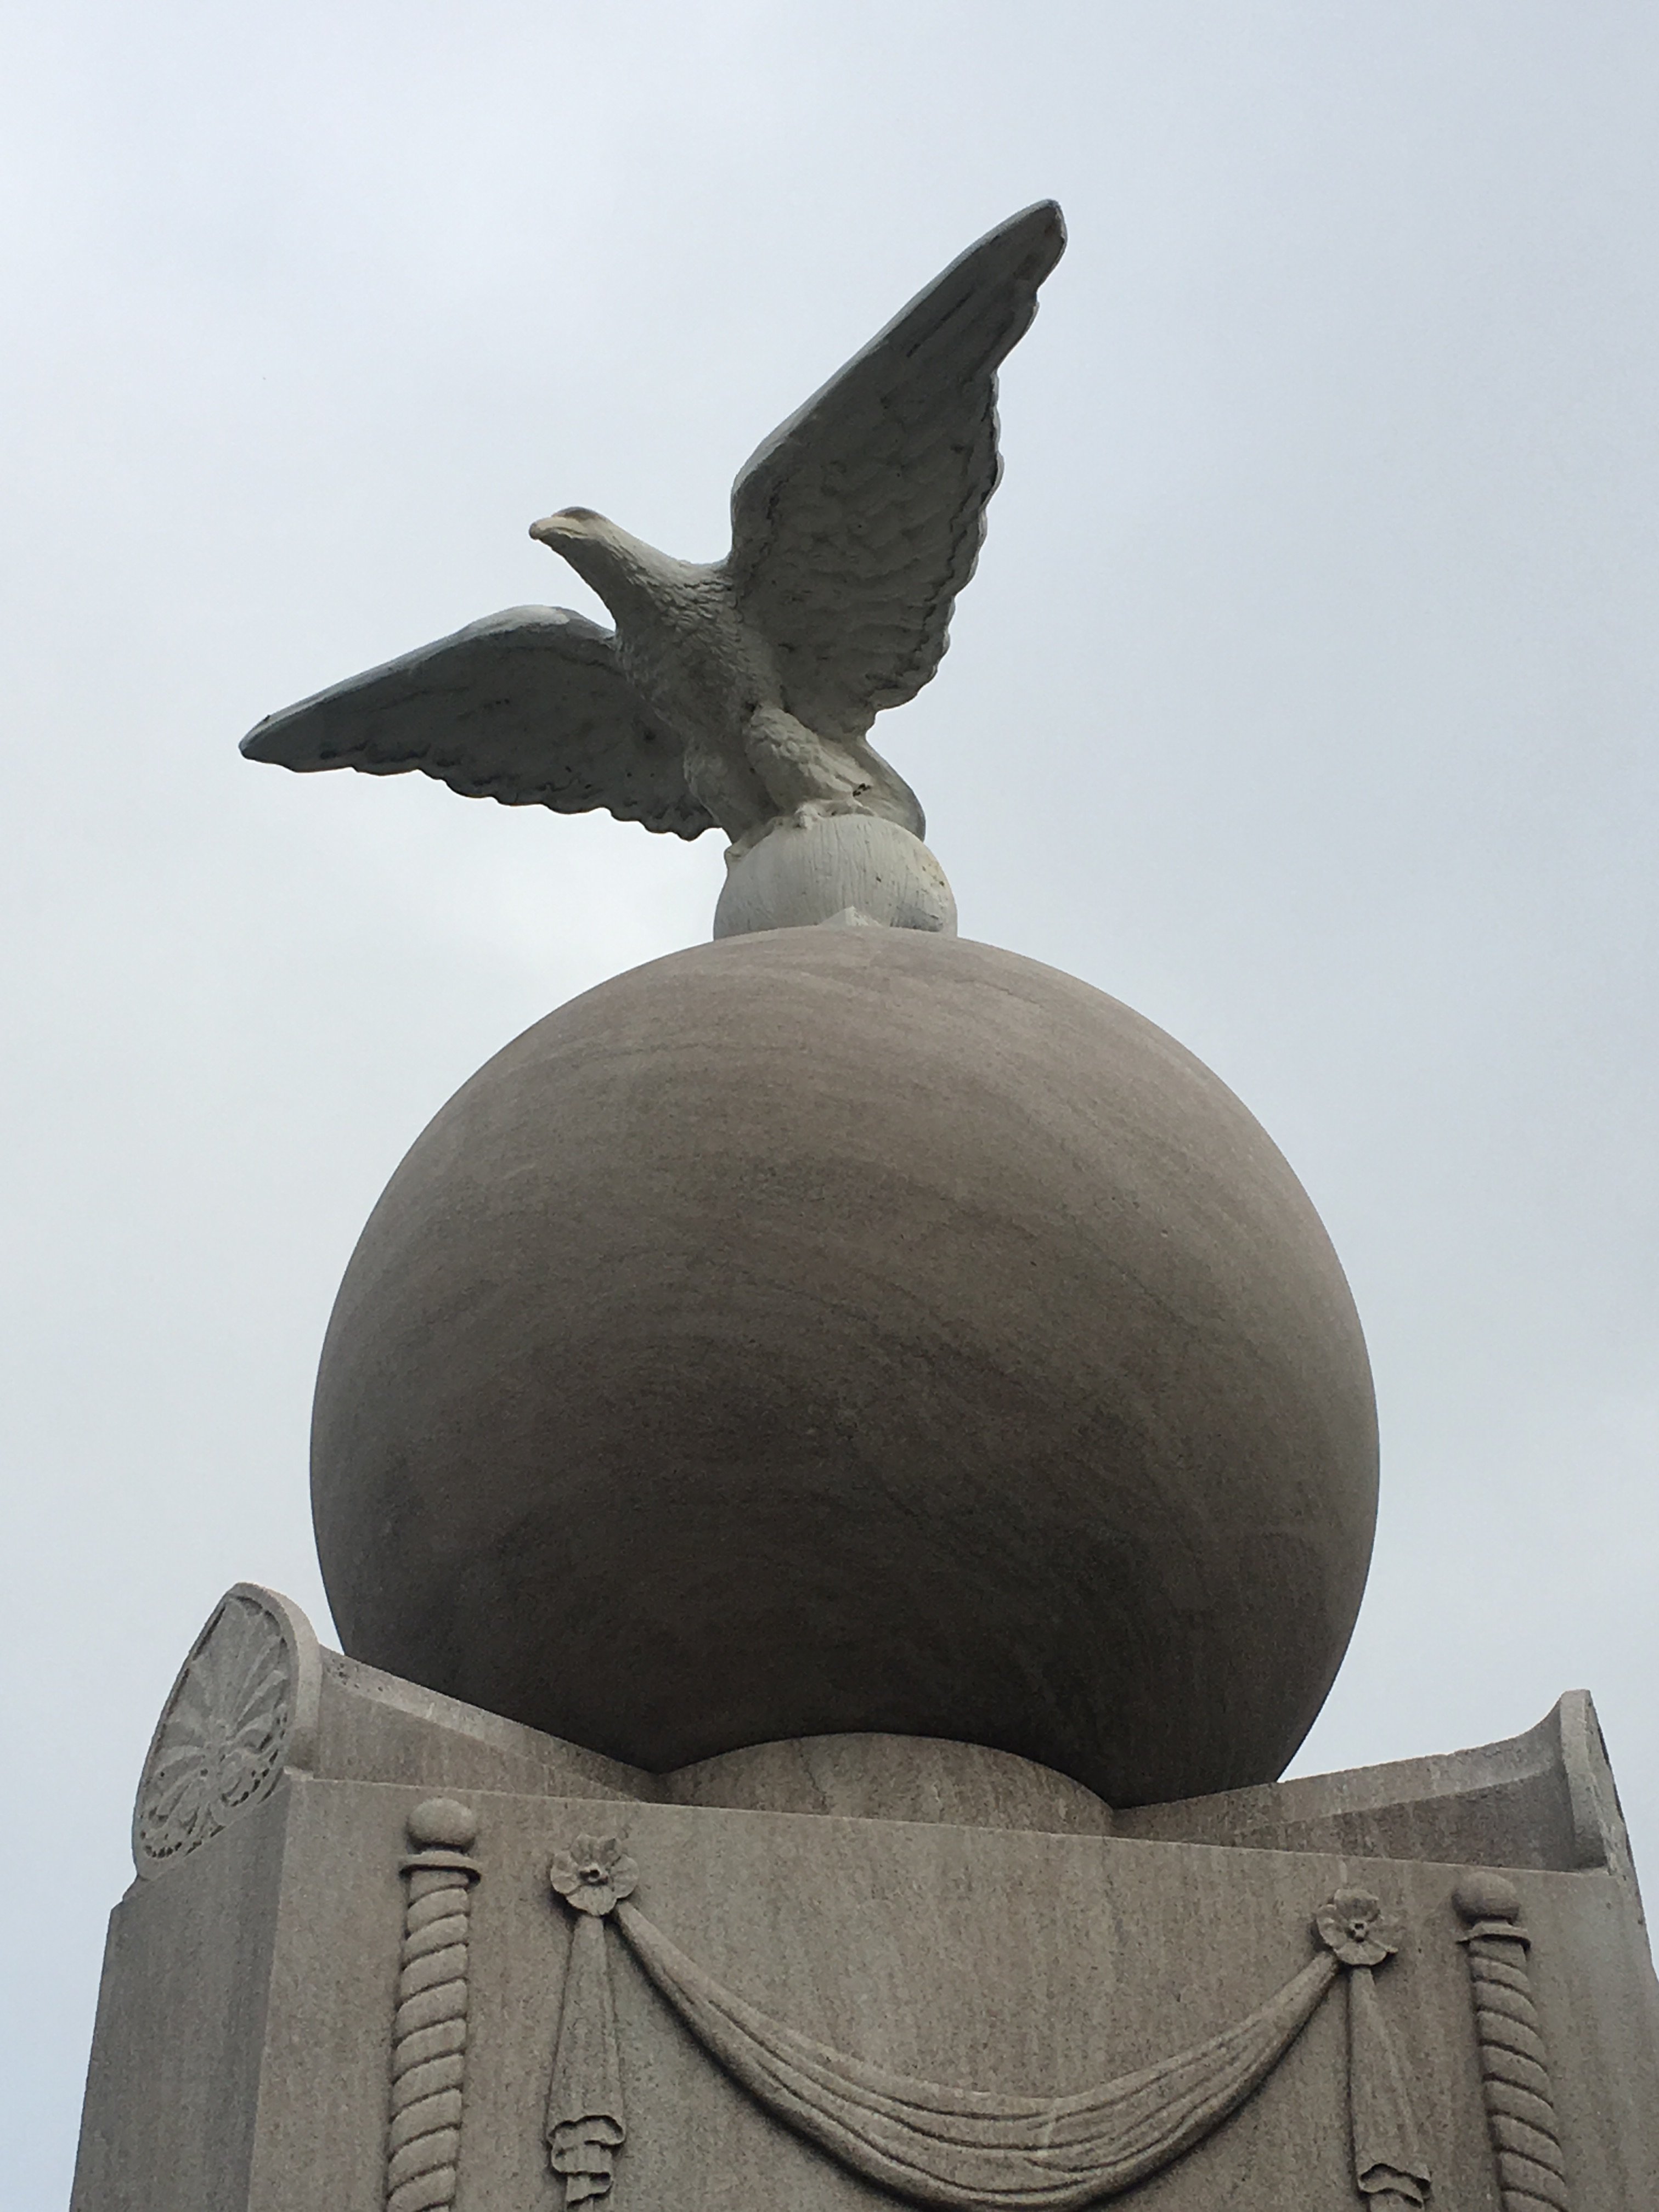 The eagle on top of the globe. Taken by 